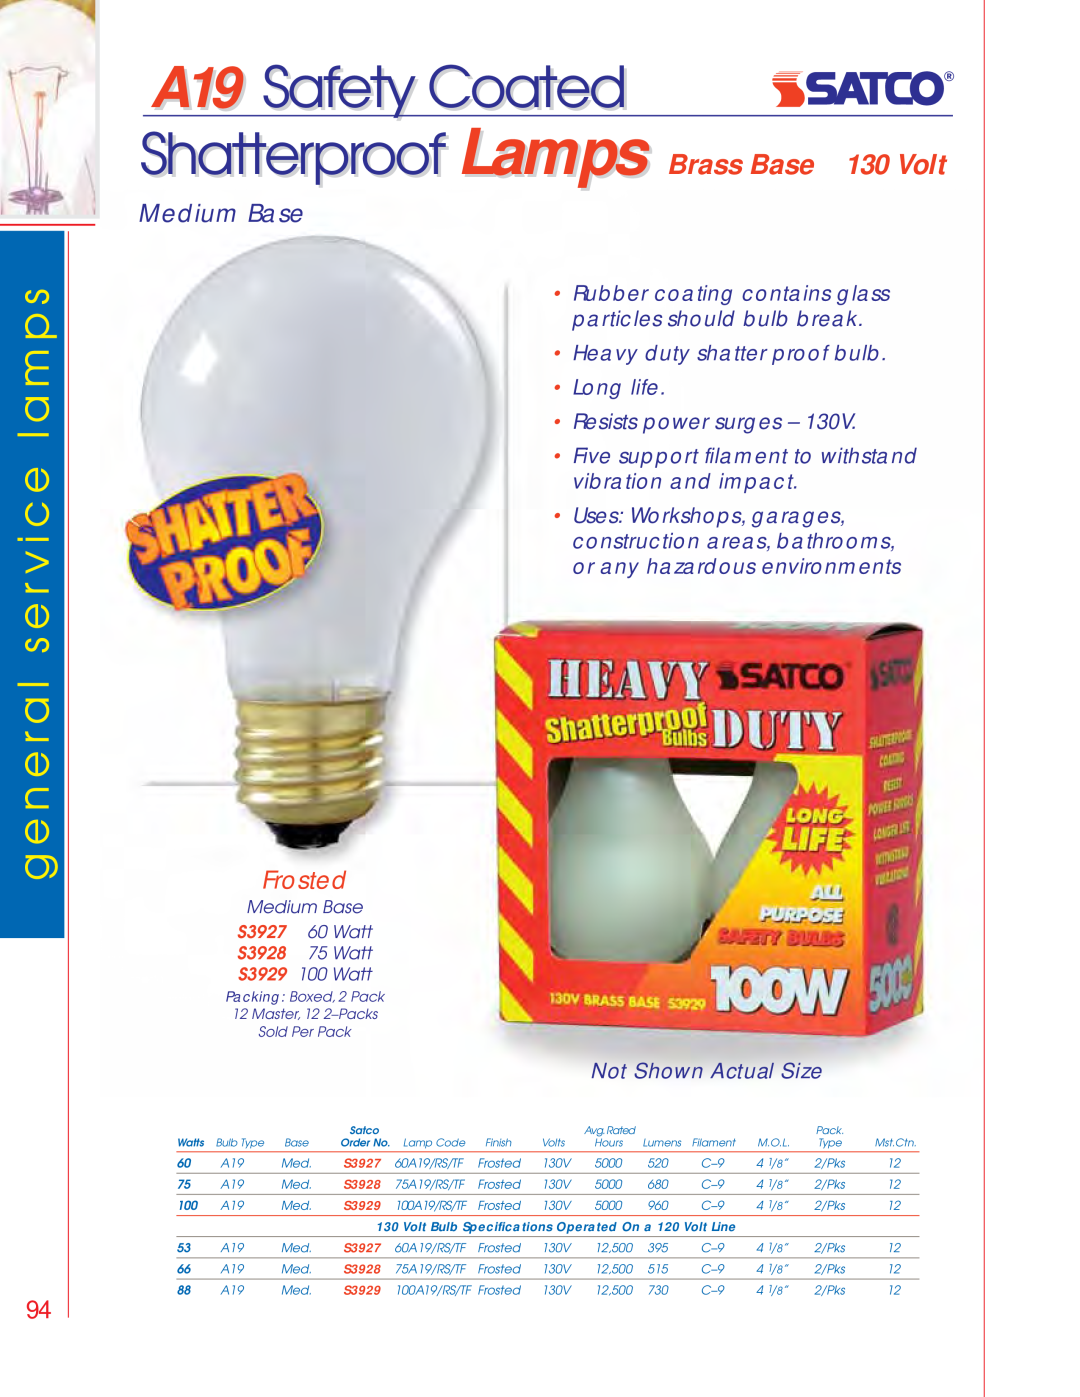 Satco Products S3691 A19 Safety Coated, Shatterproof Lamps Brass Base 130 Volt, Heavy duty shatter proof bulb Long life 